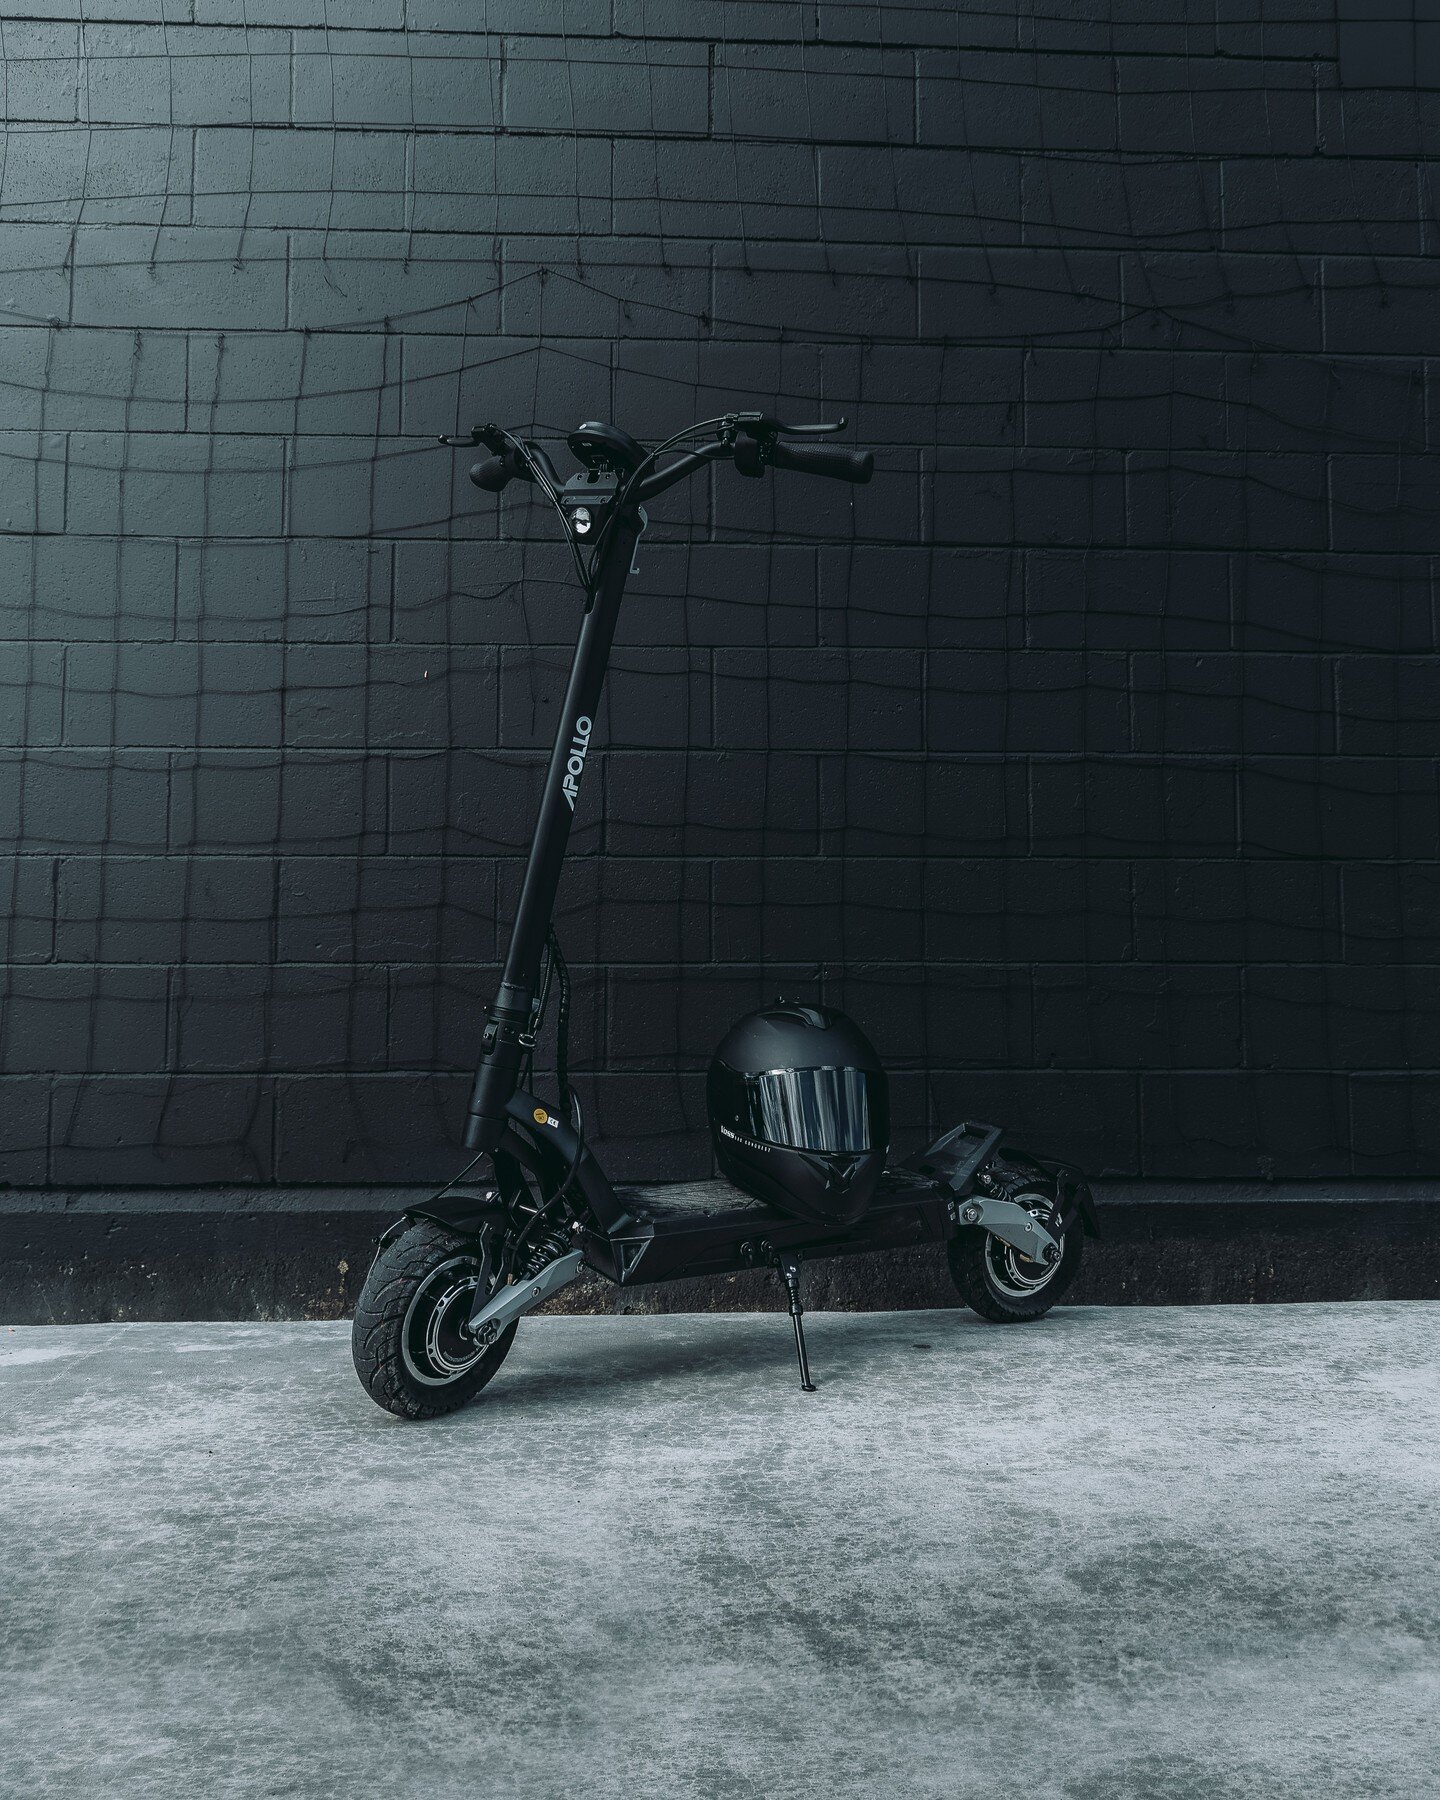 This is the Phantom 2023 by Apollo Scooter, their most iconic scooter yet!

I absolutely loved the Phantom 2022, but the Phantom 2023 takes it to a new level. With Features like Quad Suspension, Regenerative Breaking, Speeds up to 66 KM/H, App connec